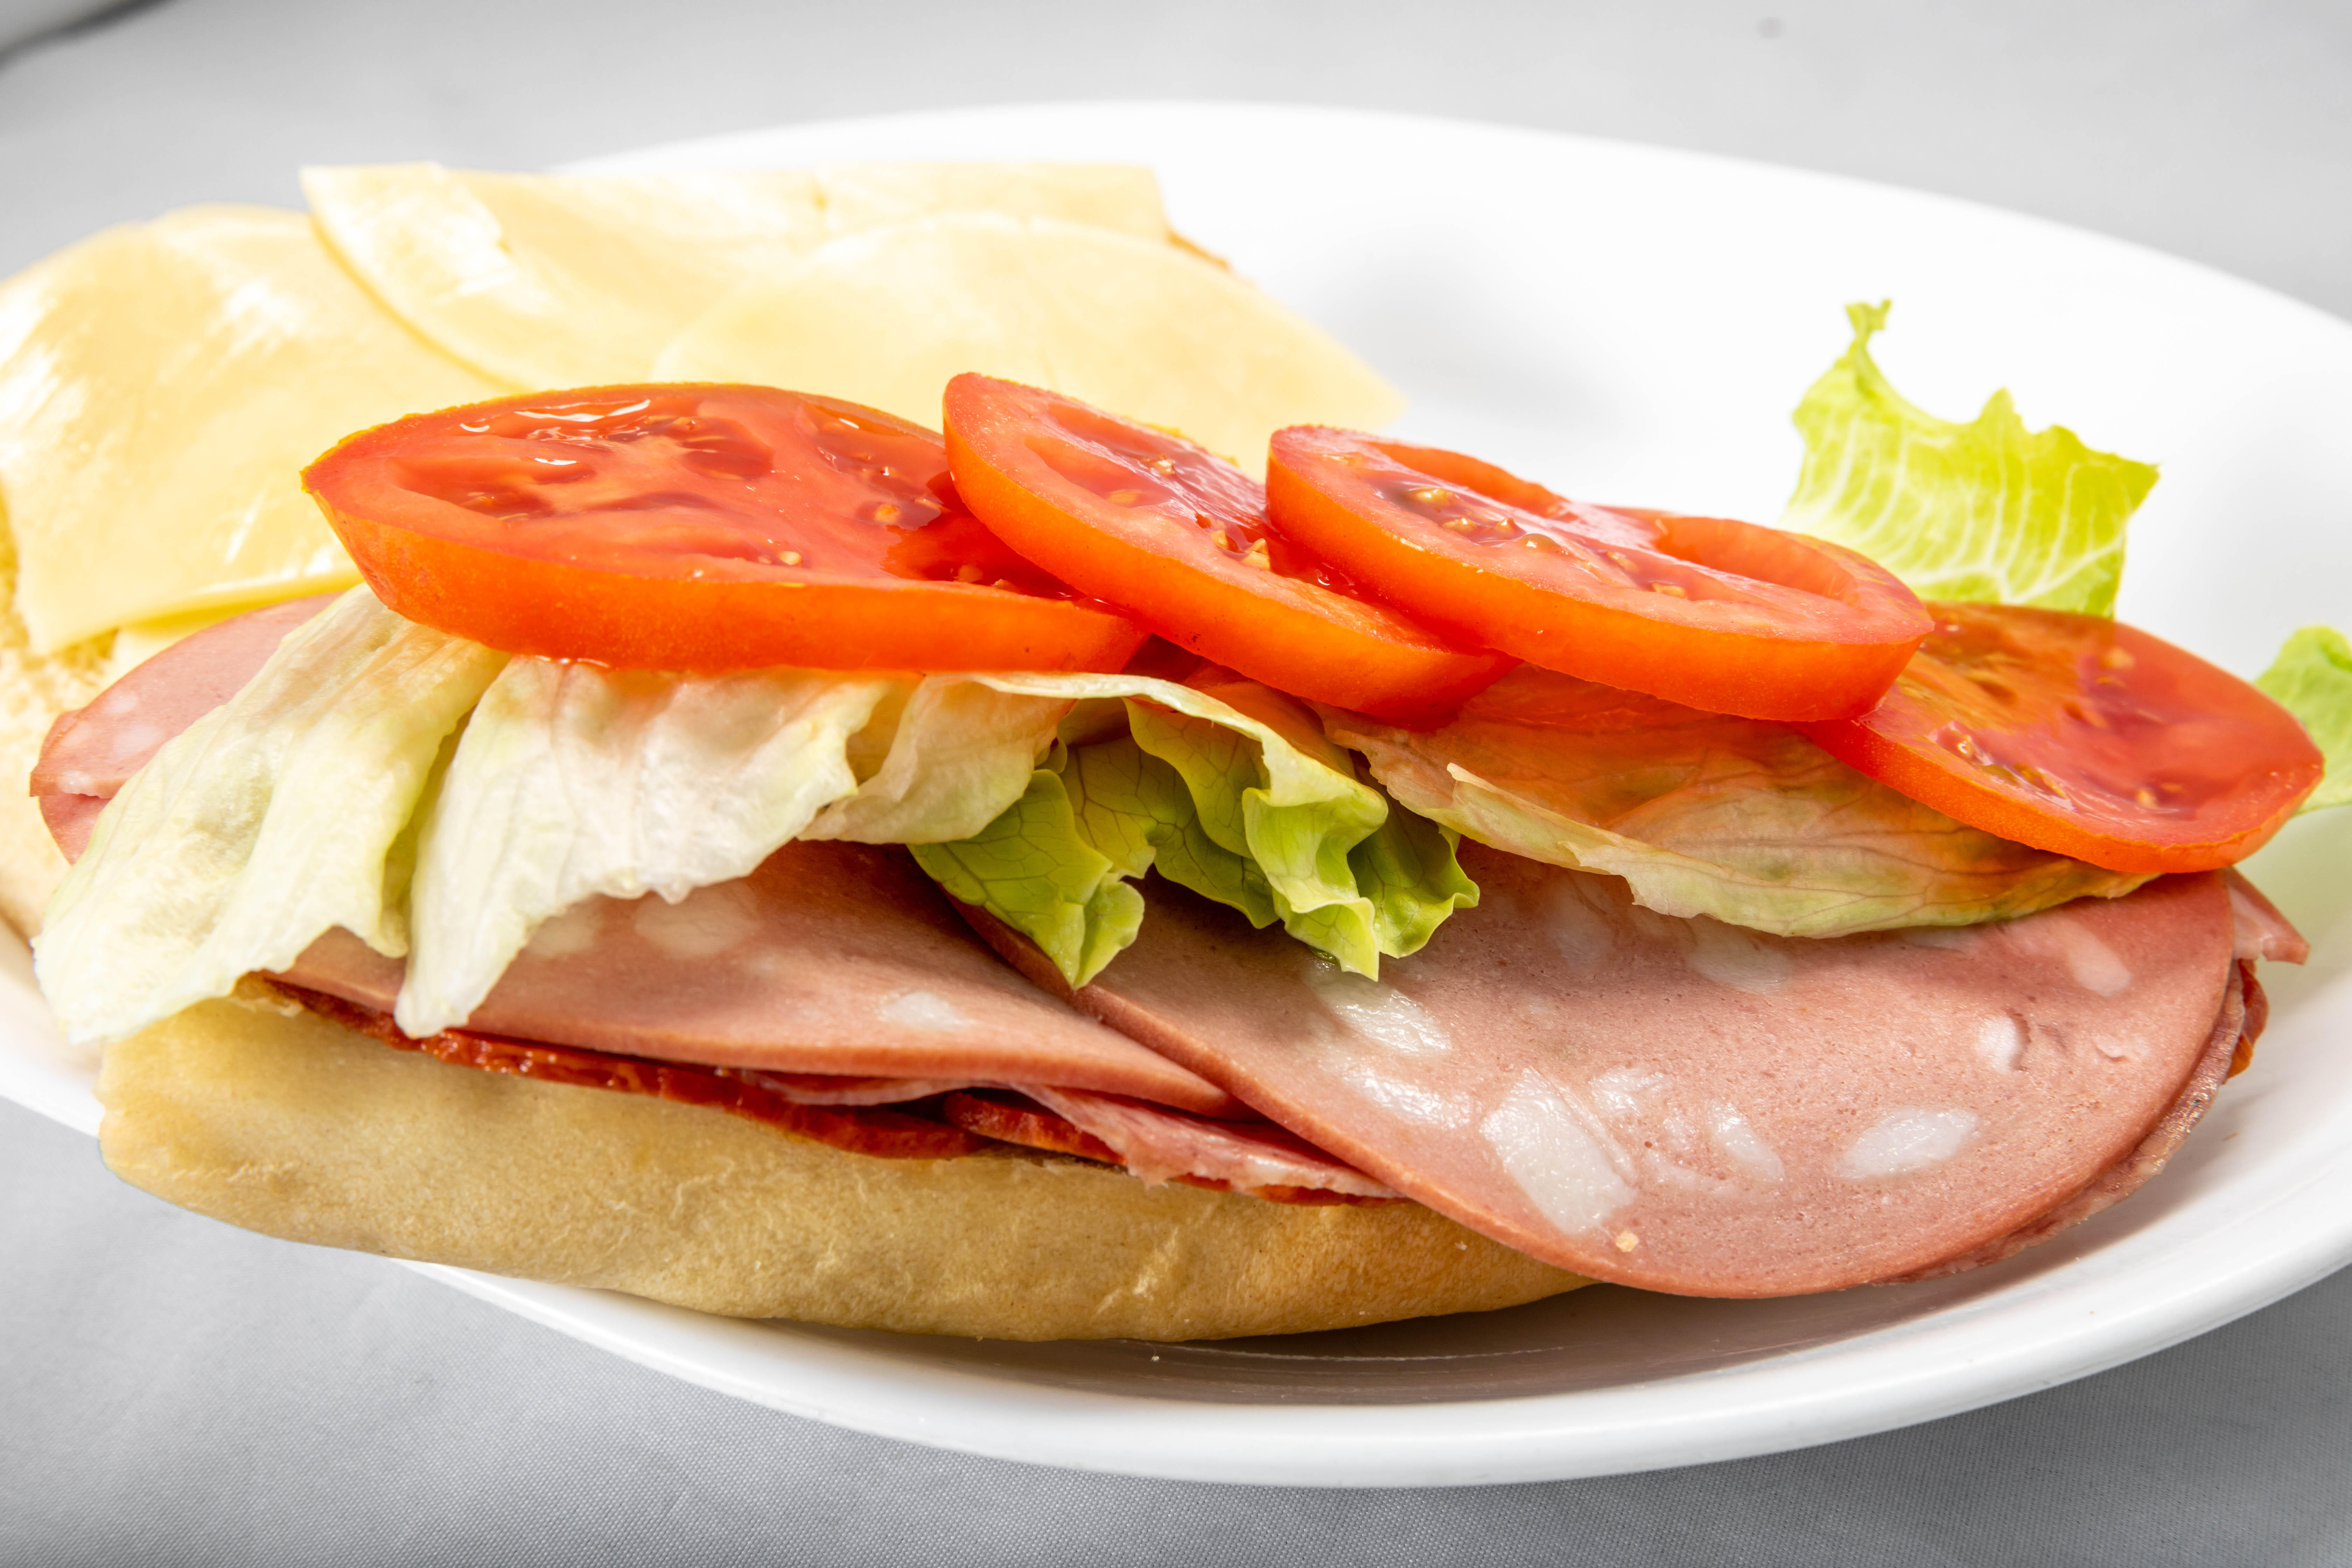 Deli Subs and Sandwiches made to order!